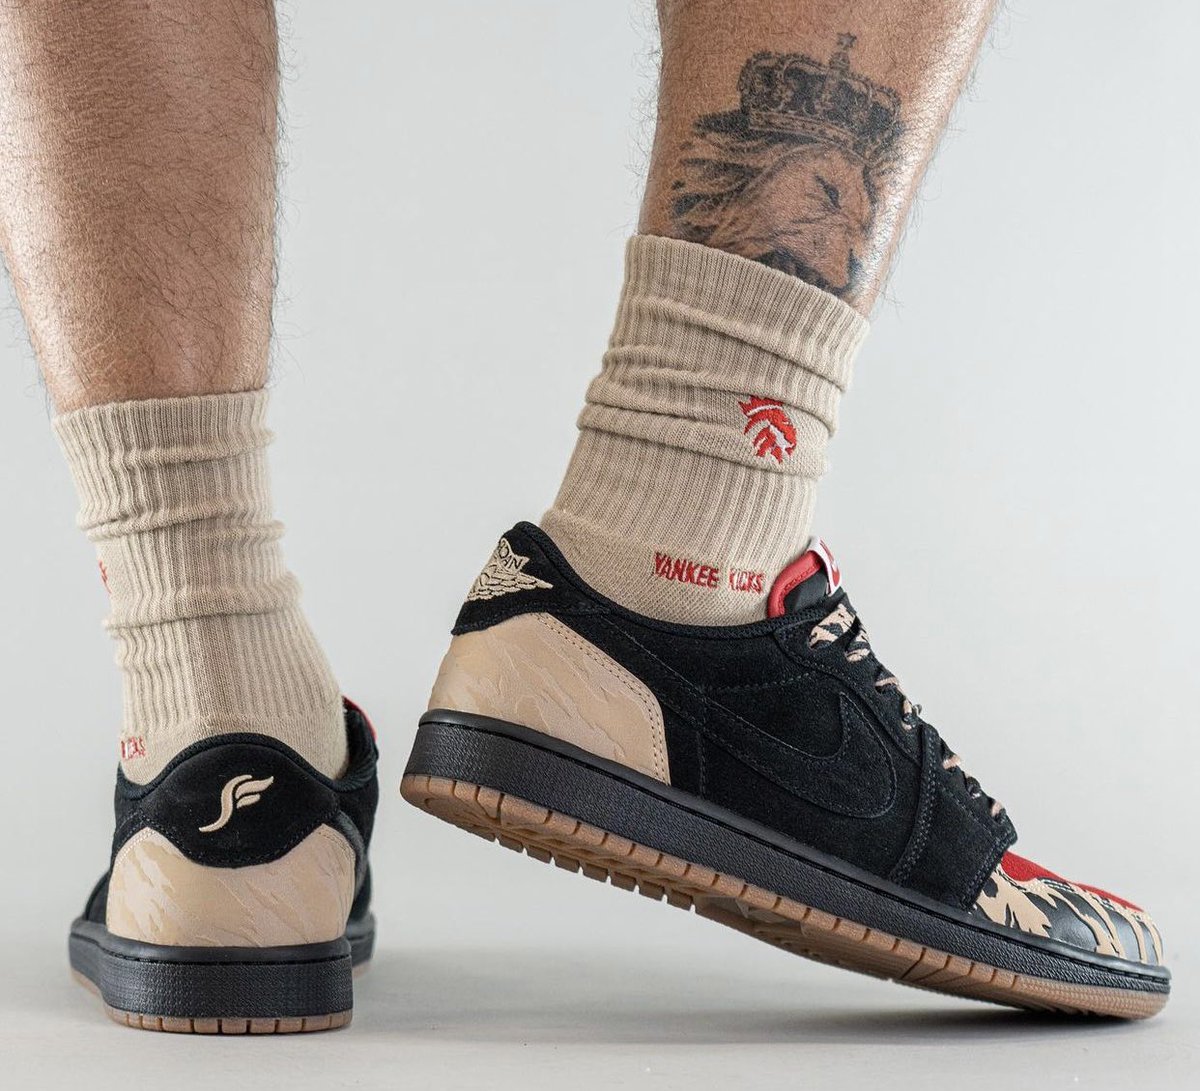 On-feet photos of the new “Carnivore” SoleFly x Air Jordan 1 Low. =>bit.ly/lovesneakernews